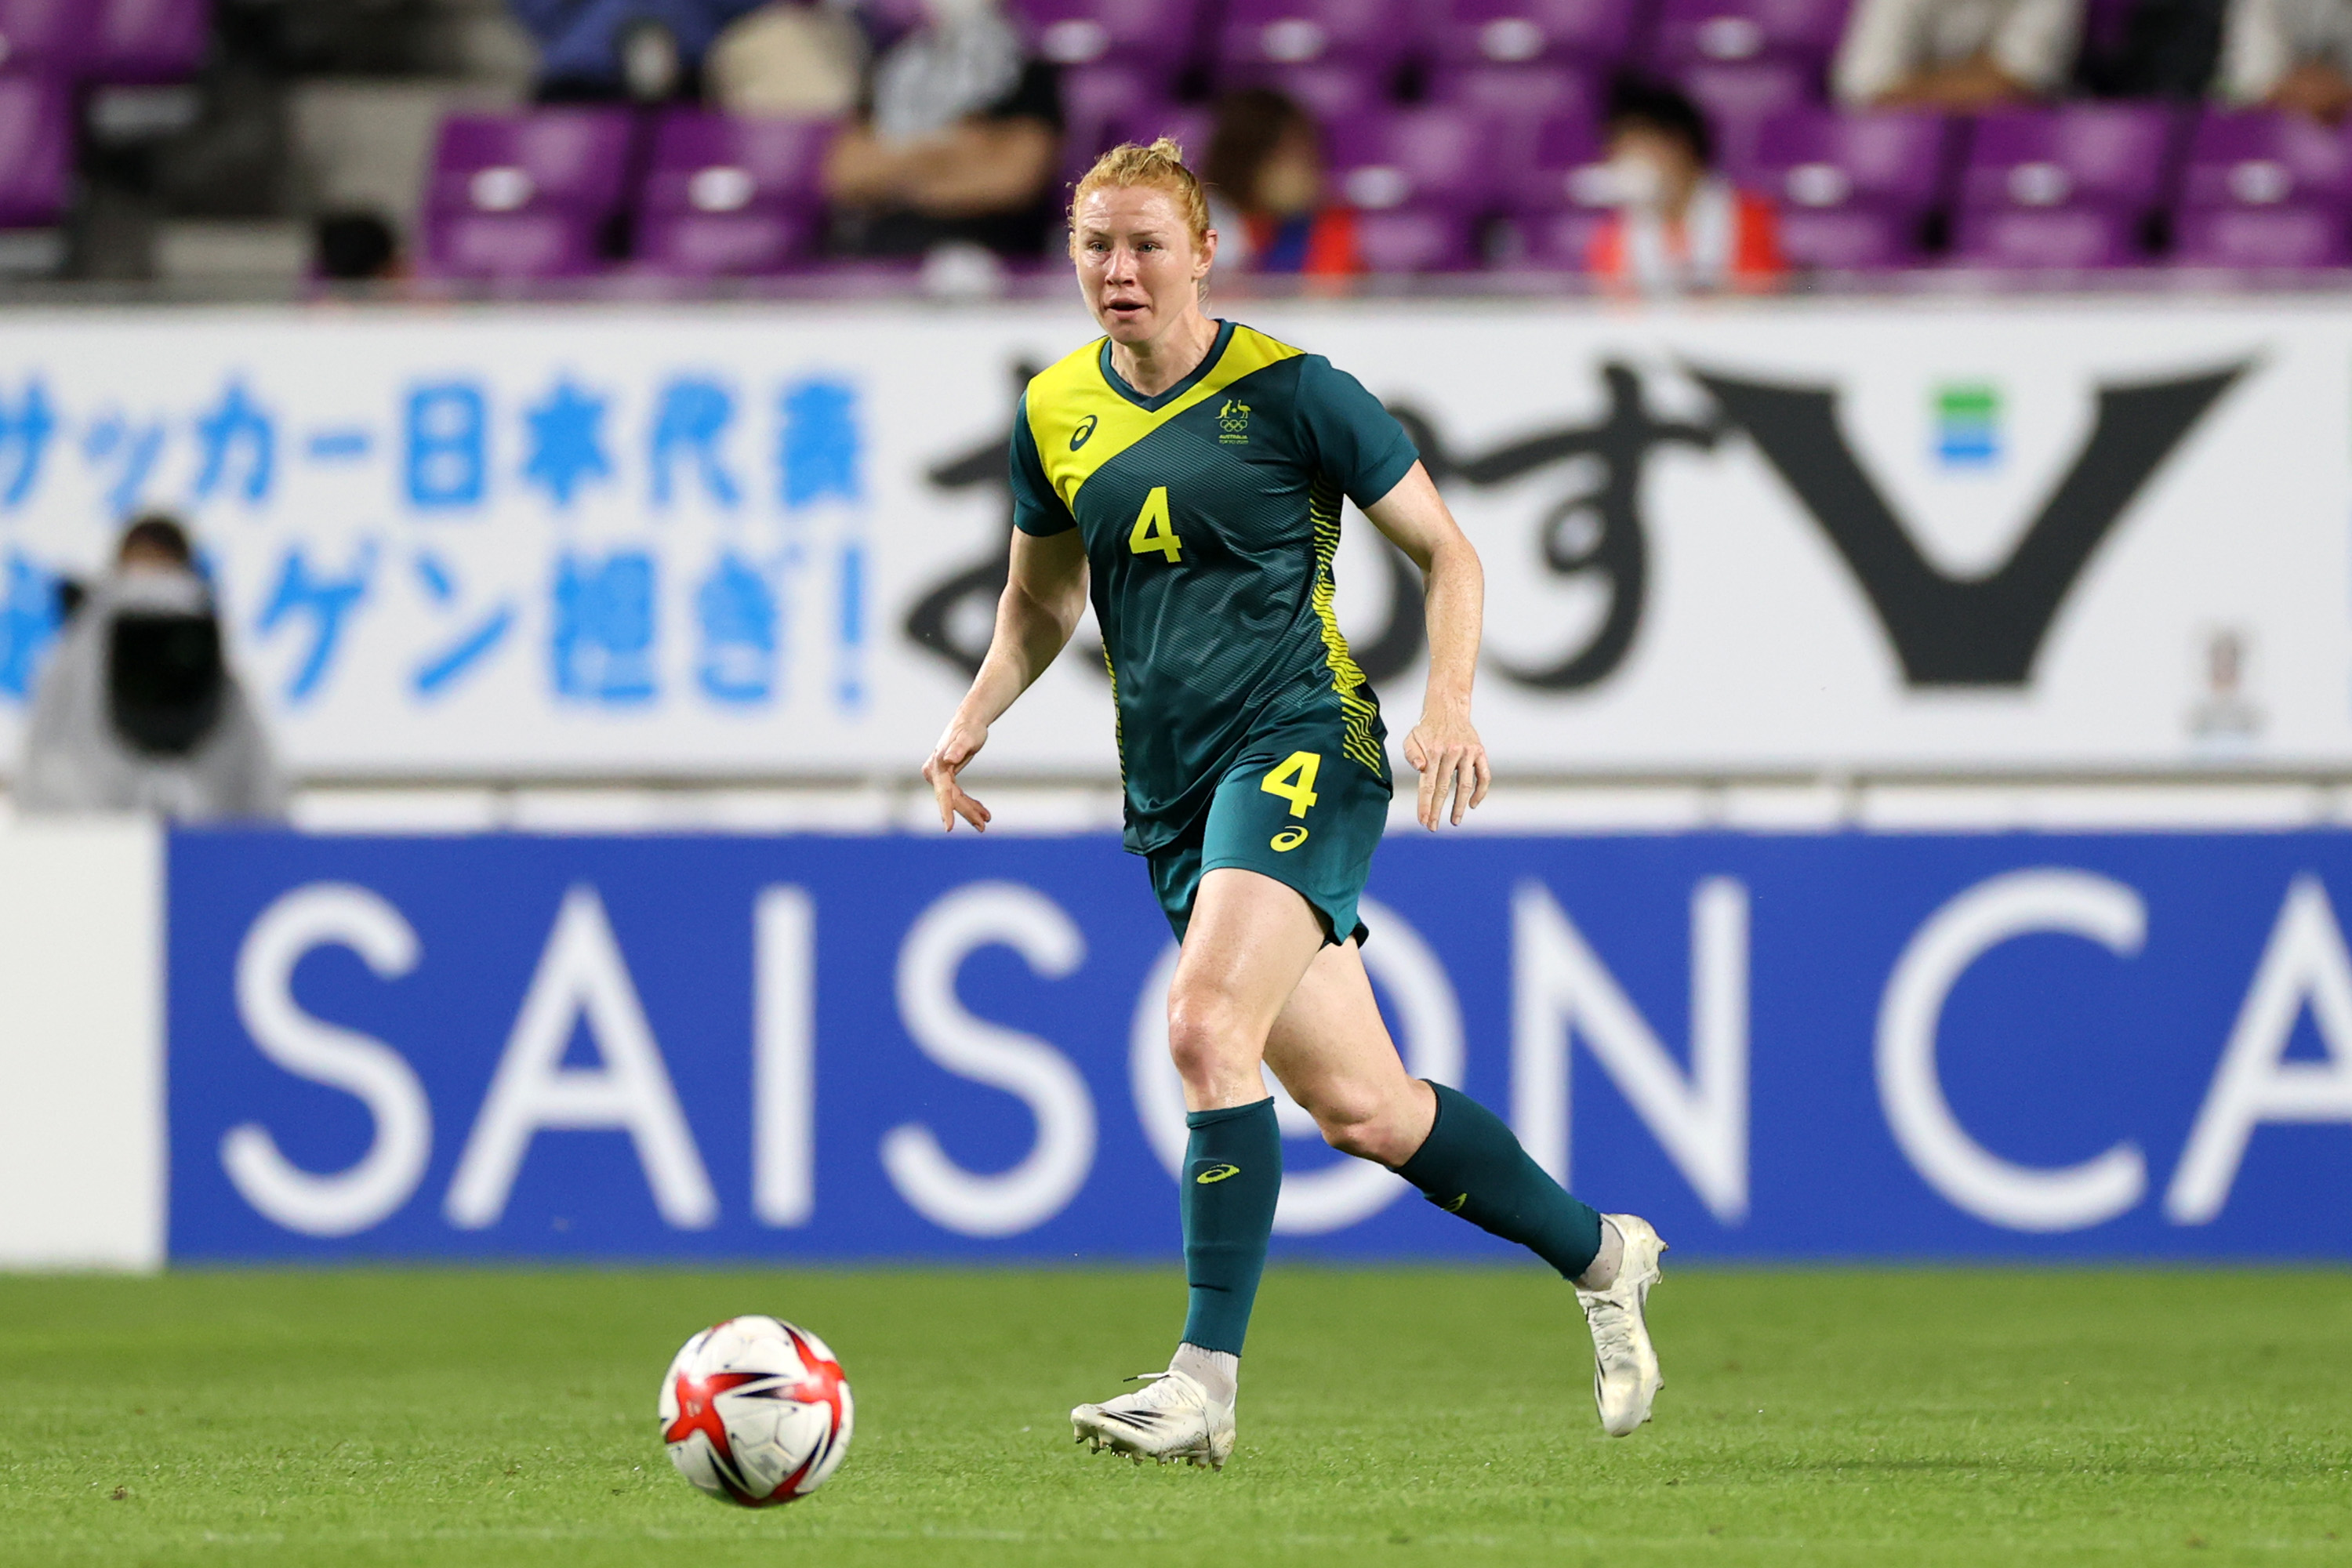 Clare Polkinghorne of Australia in action during the women's international friendly match between Japan and Australia at Sanga Stadium by Kyocera on July 14, 2021 in Kameoka, Kyoto, Japan. (Photo by Masashi Hara/Getty Images)